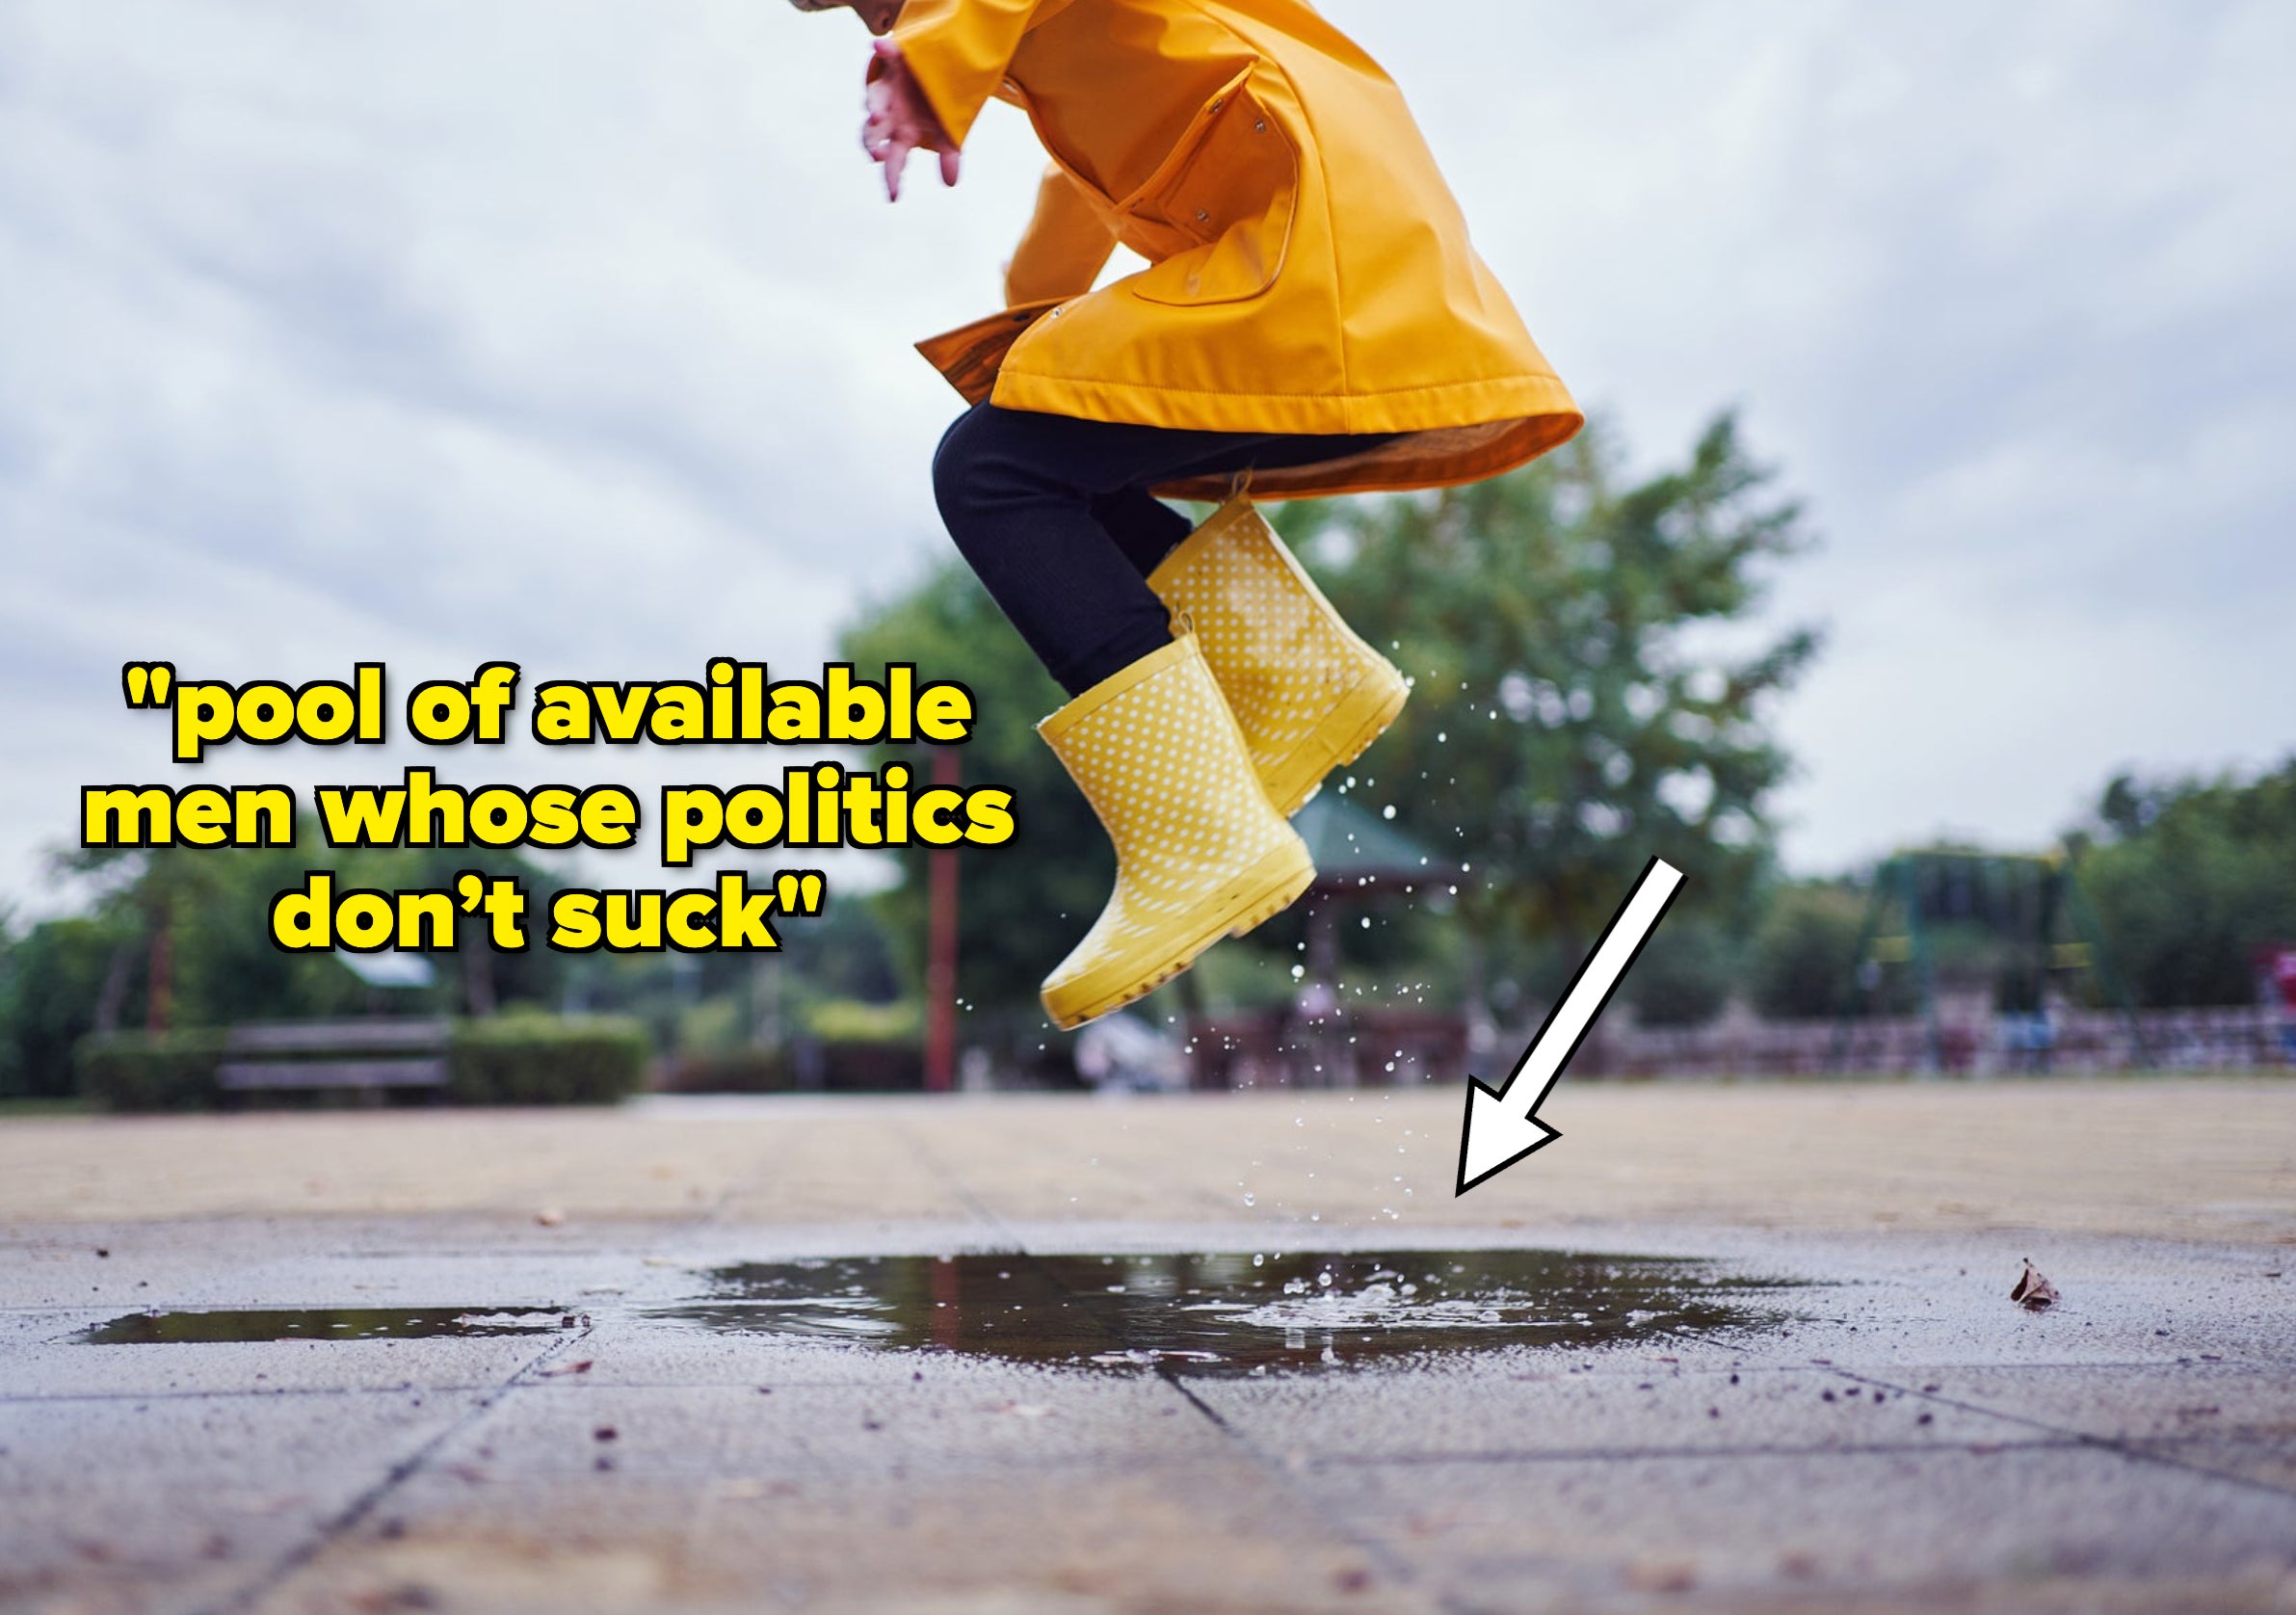 Cute and playful female child jumping in a puddle of water on the street wearing yellow rubber boots and a raincoat